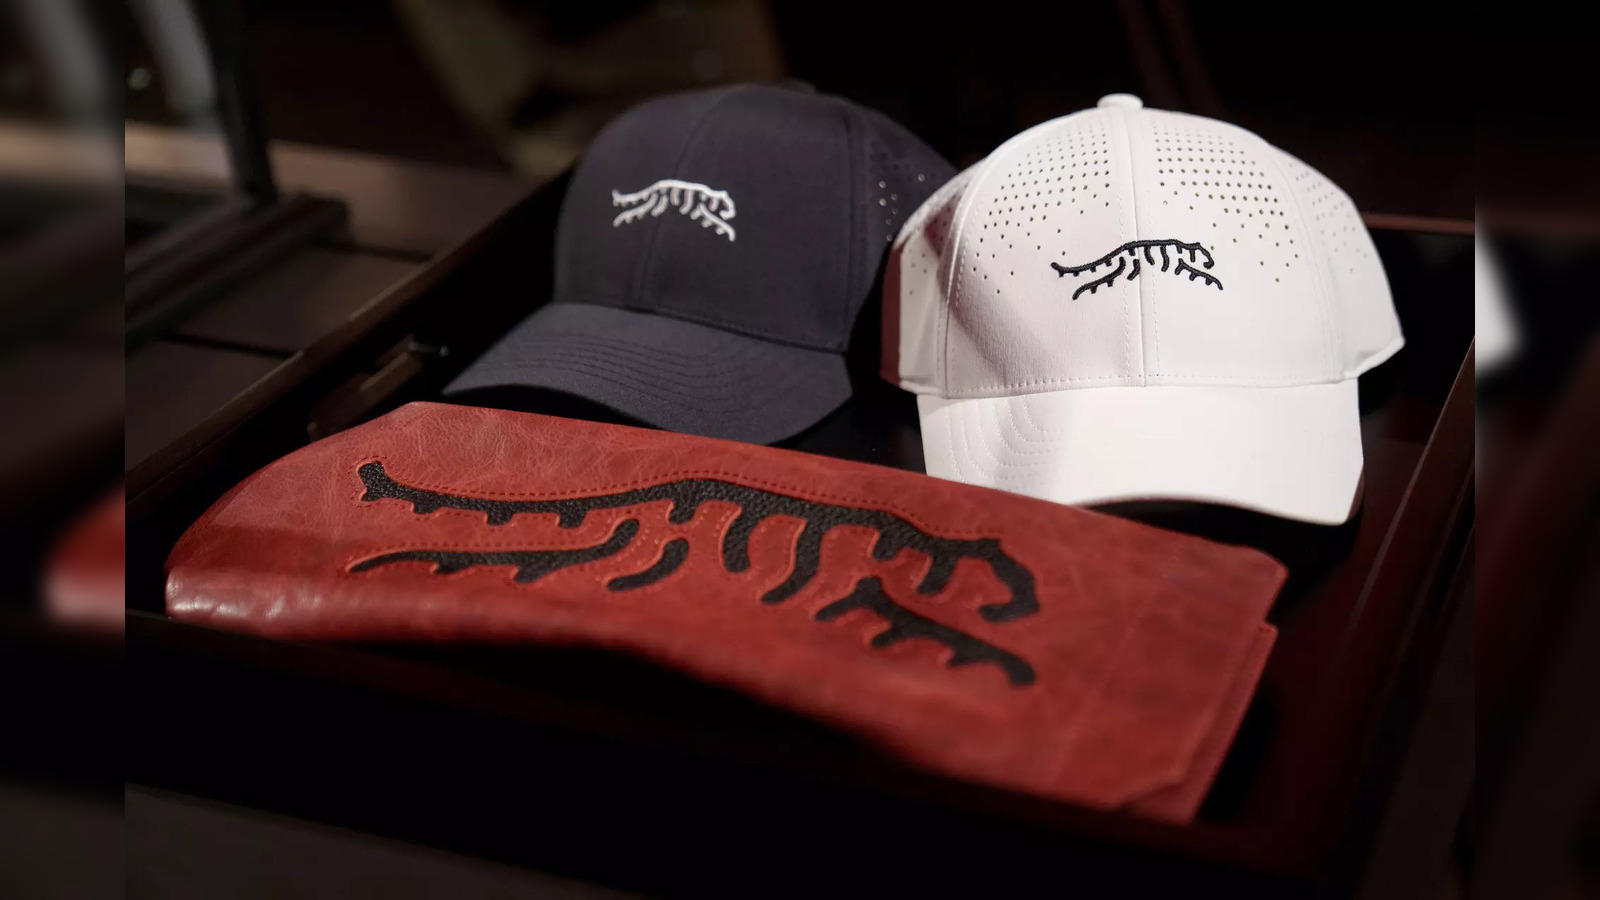 Tiger Woods announces new apparel line Sun Day Red